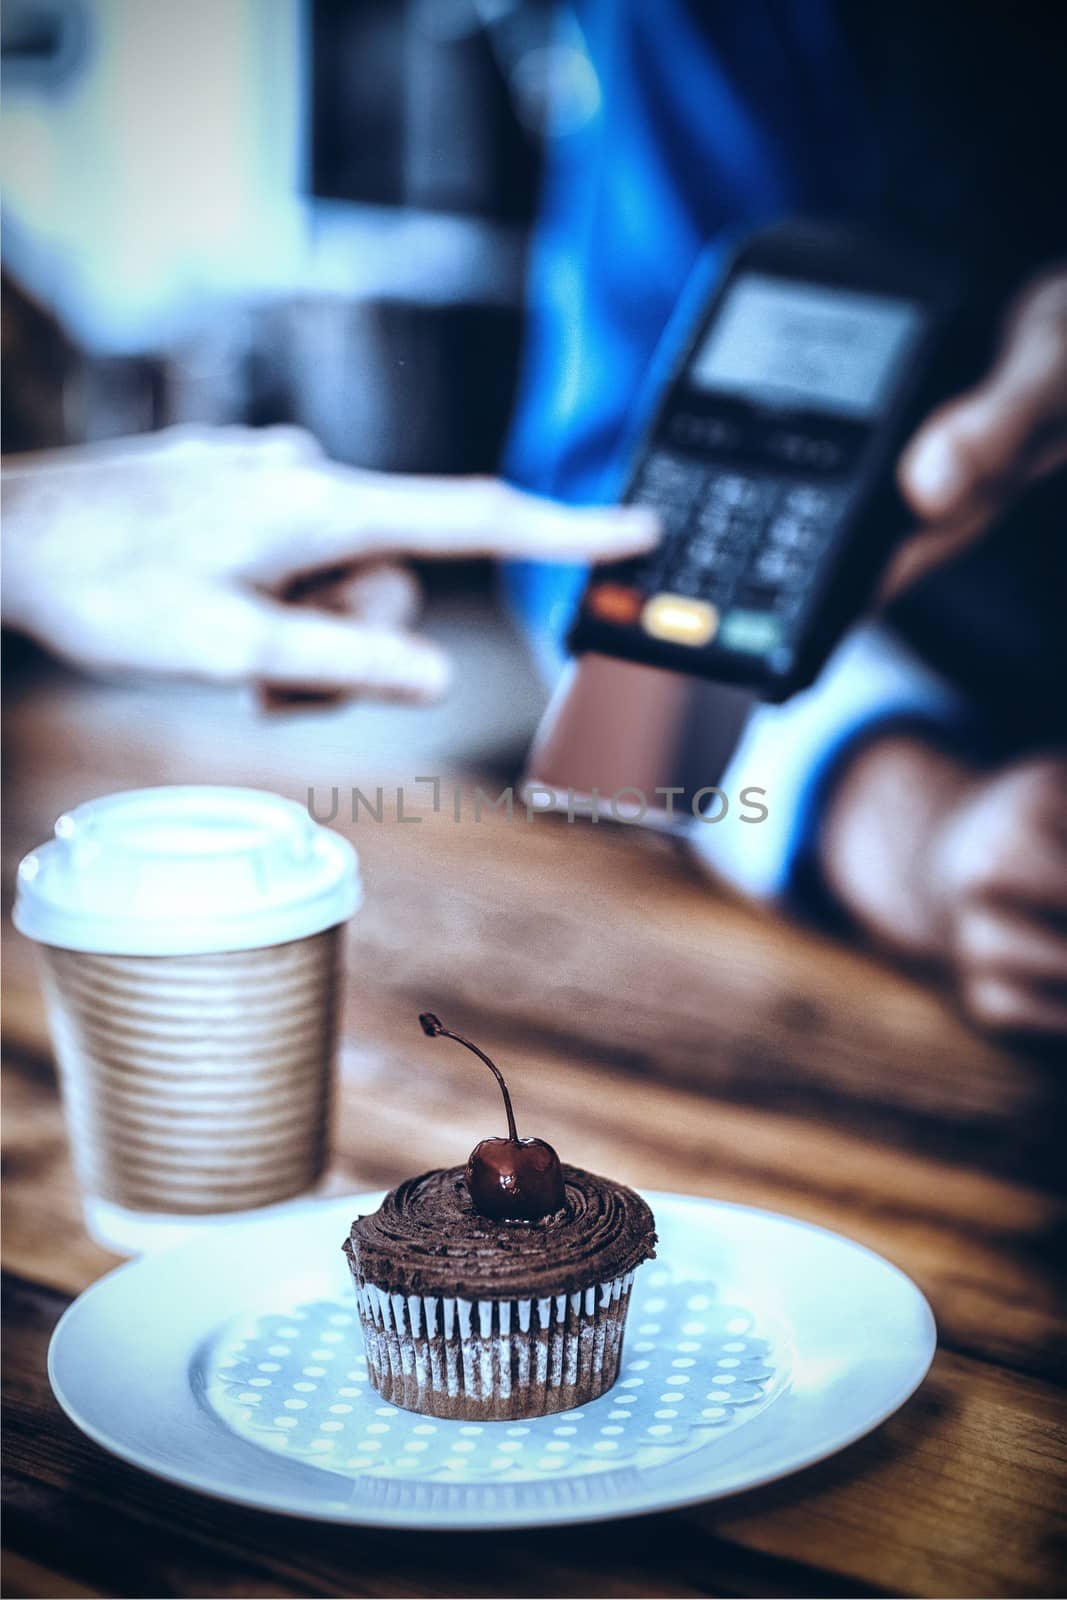 Plate of cupcake and coffee at counter in cafe by Wavebreakmedia